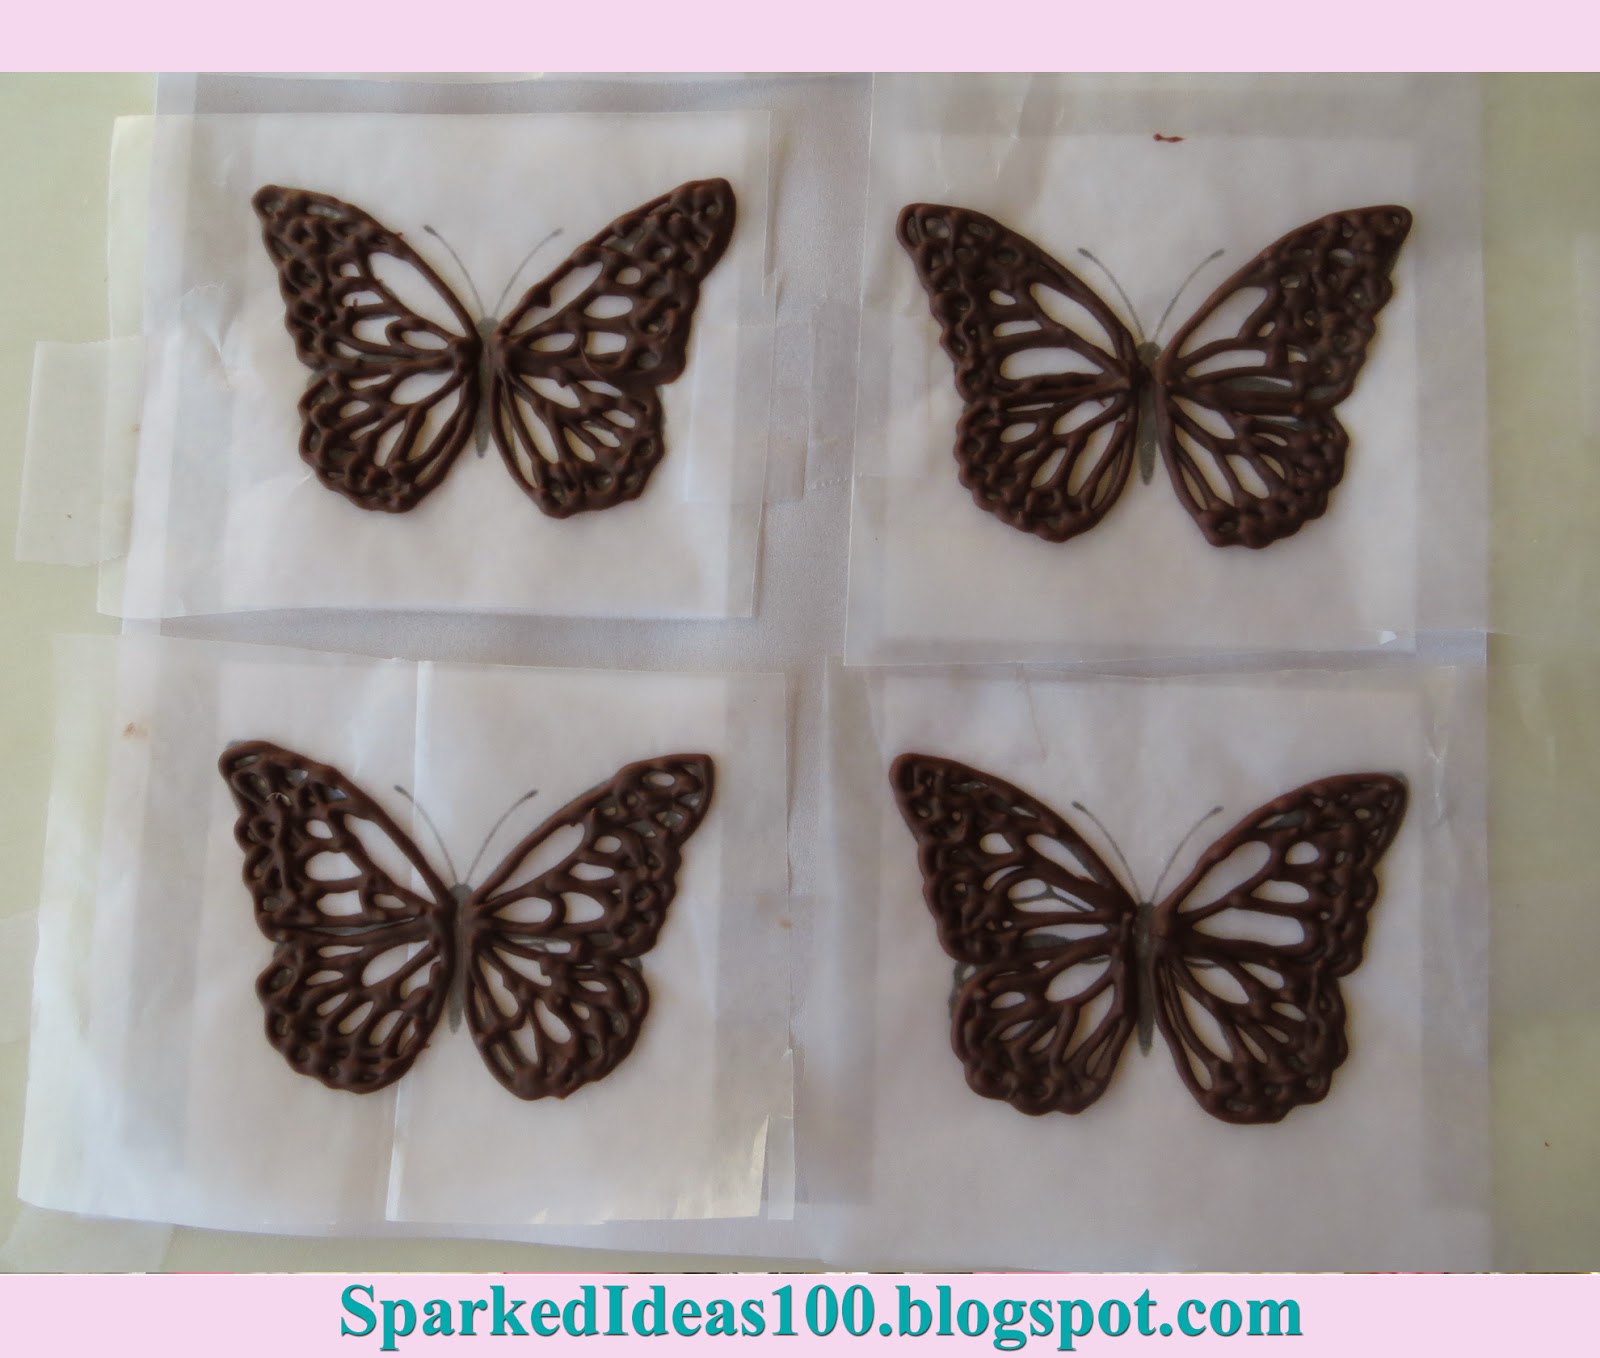 sparked-ideas-chocolate-butterfly-toppers-attempt-no-1